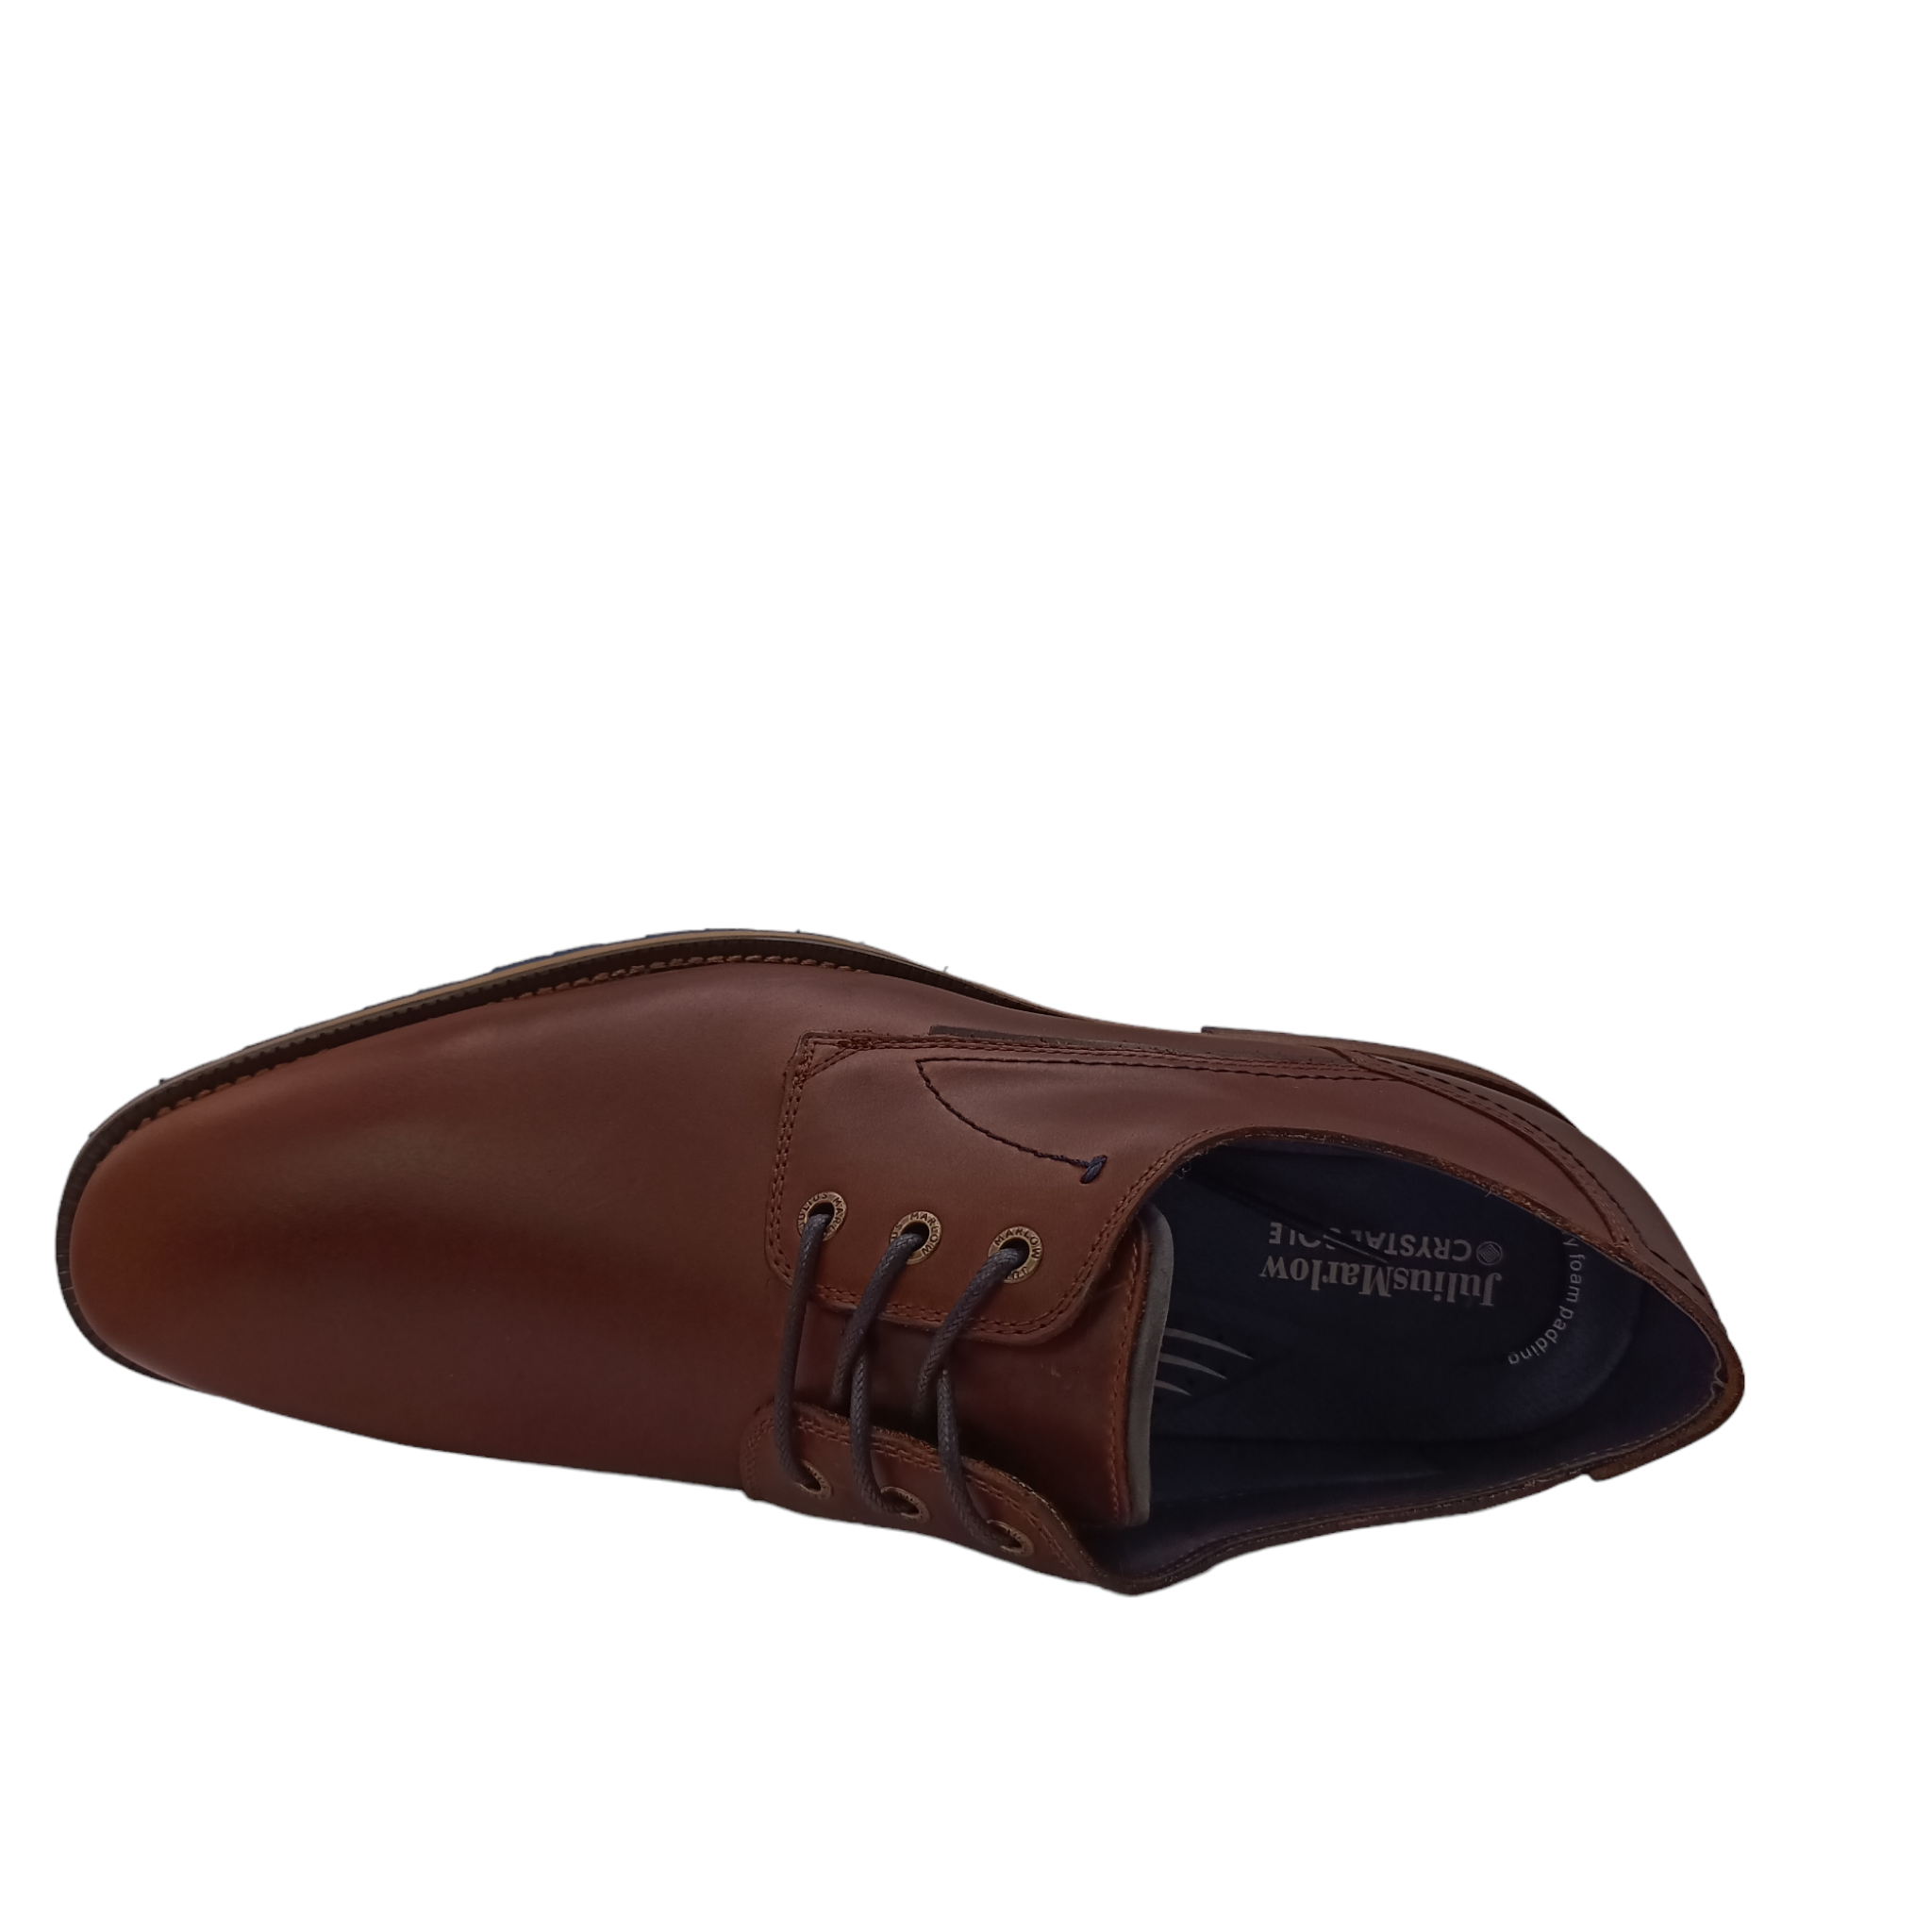 Shop Render Julius Marlow - with shoe&amp;me - from Julius Marlow - Shoes - Mens, Shoe, Winter